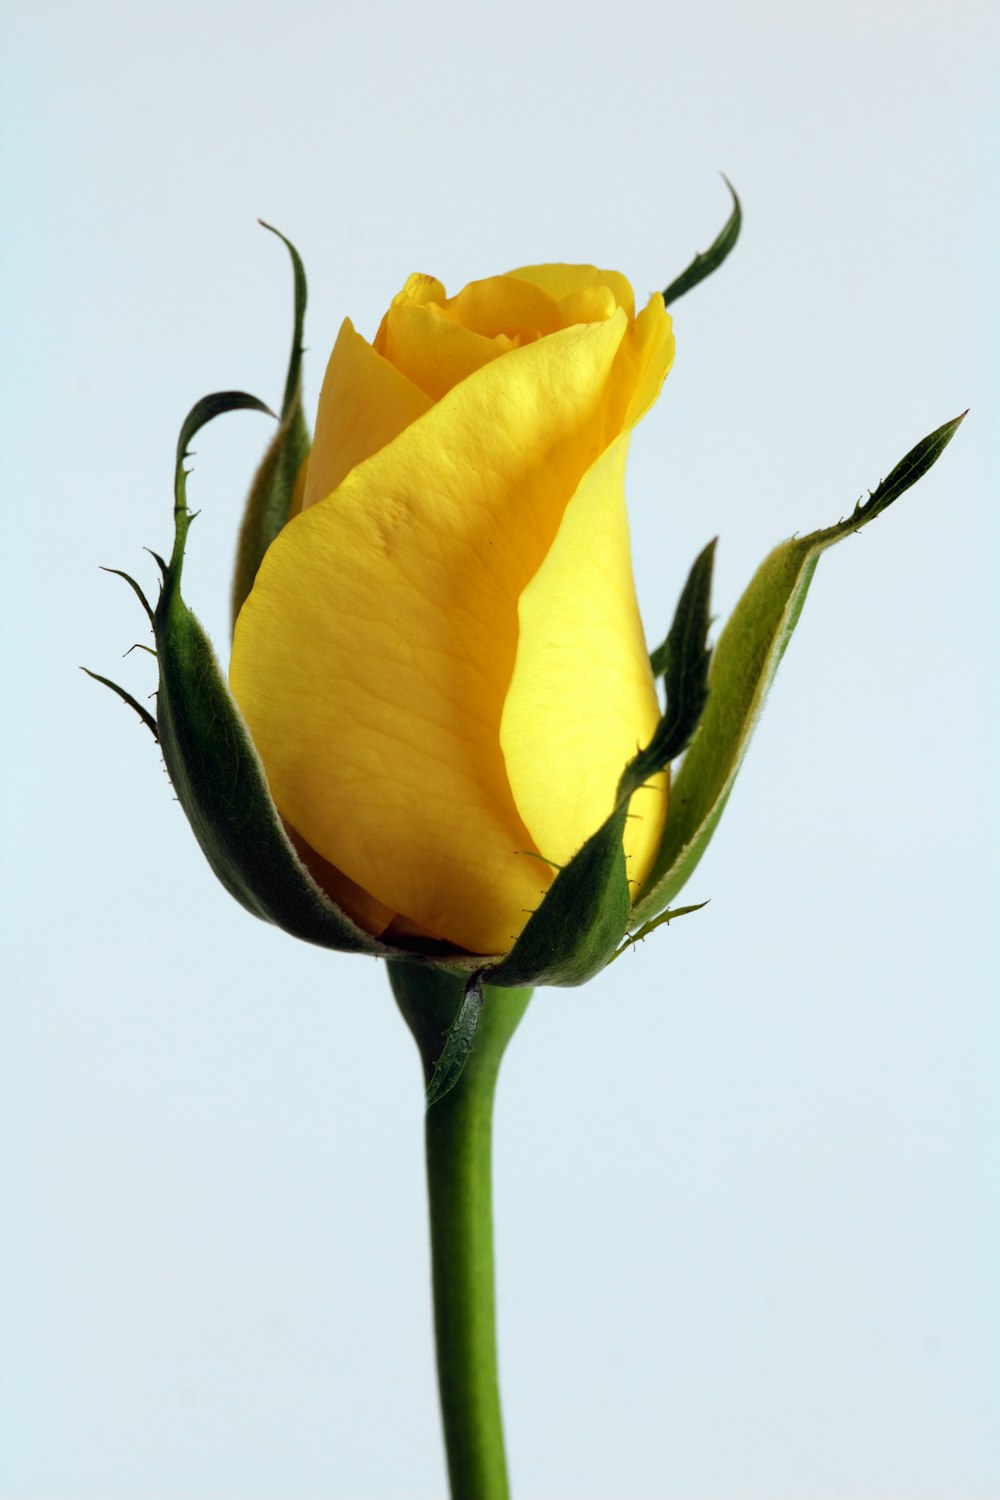 a single yellow rose with a blue sky in the background